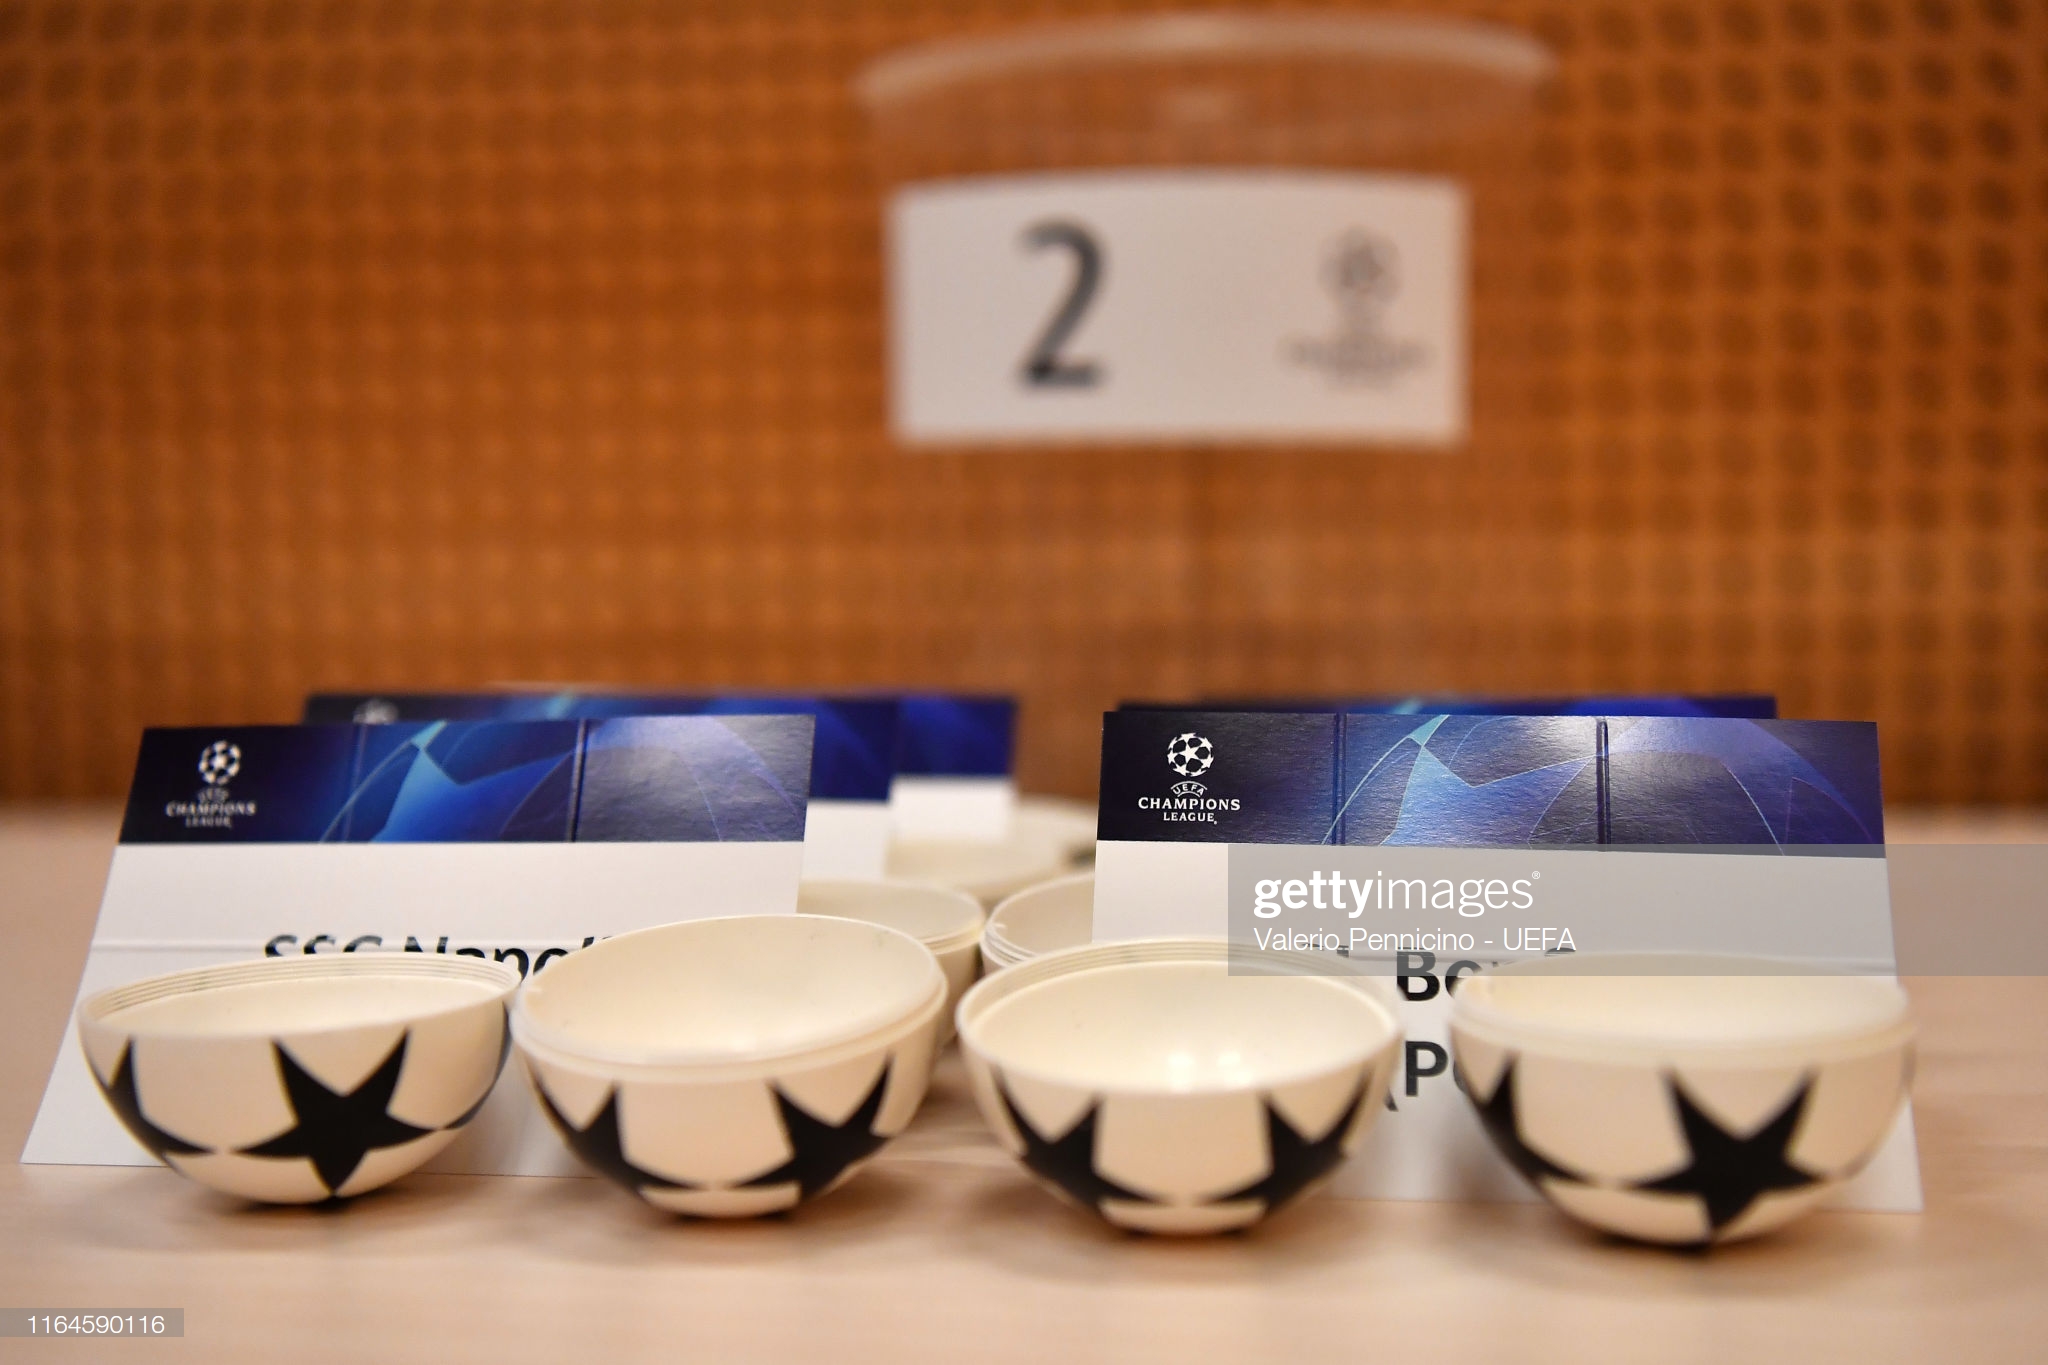 gettyimages-1164590116-2048x2048.jpg